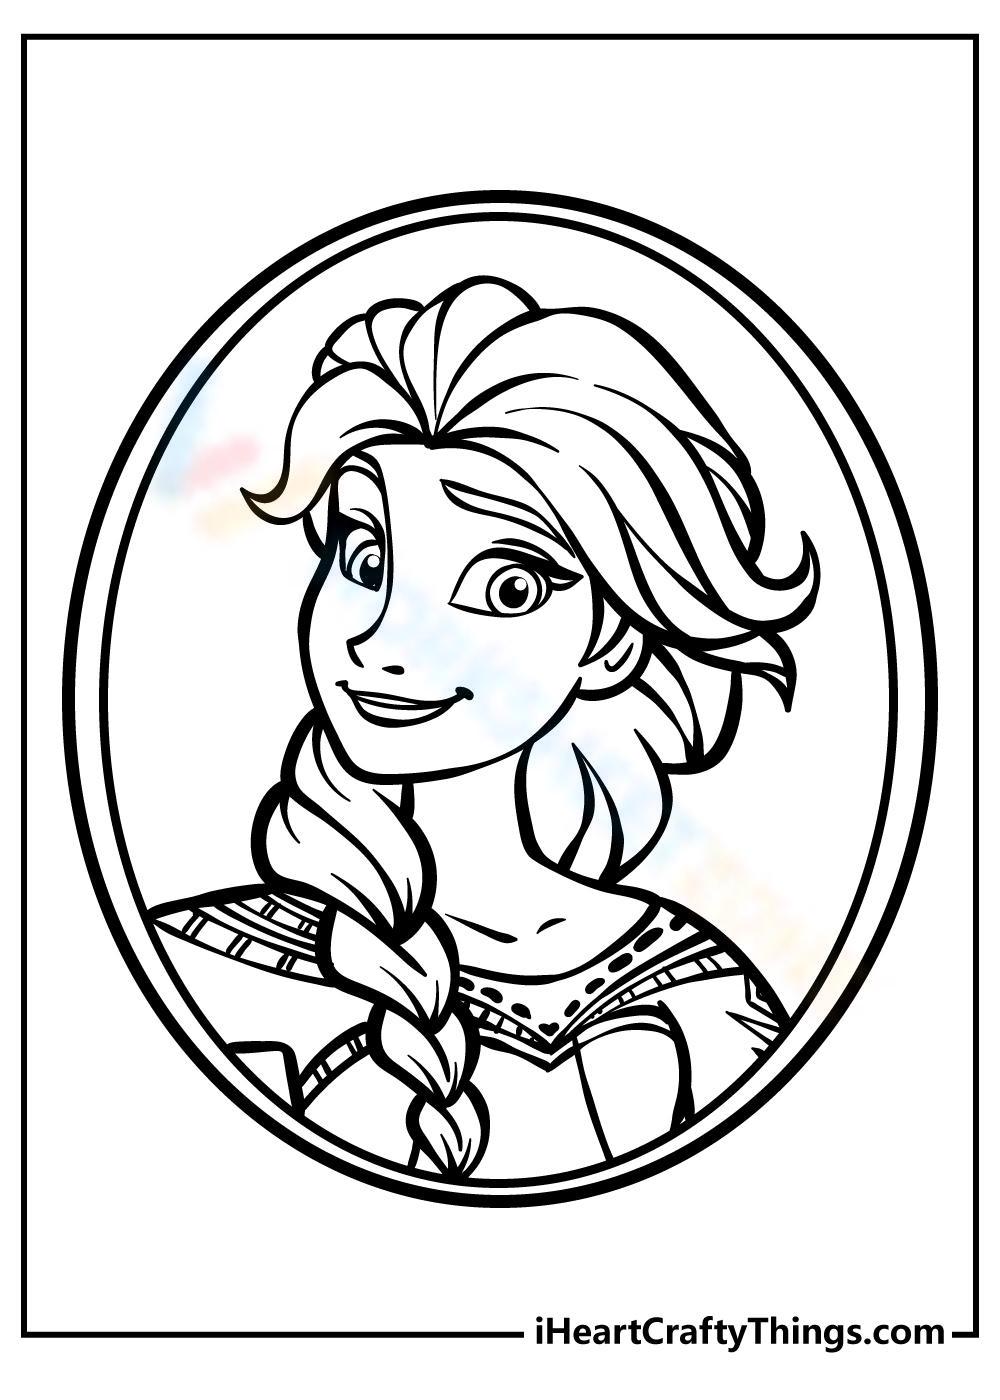 Free Printable Elsa Coloring Pages for Children